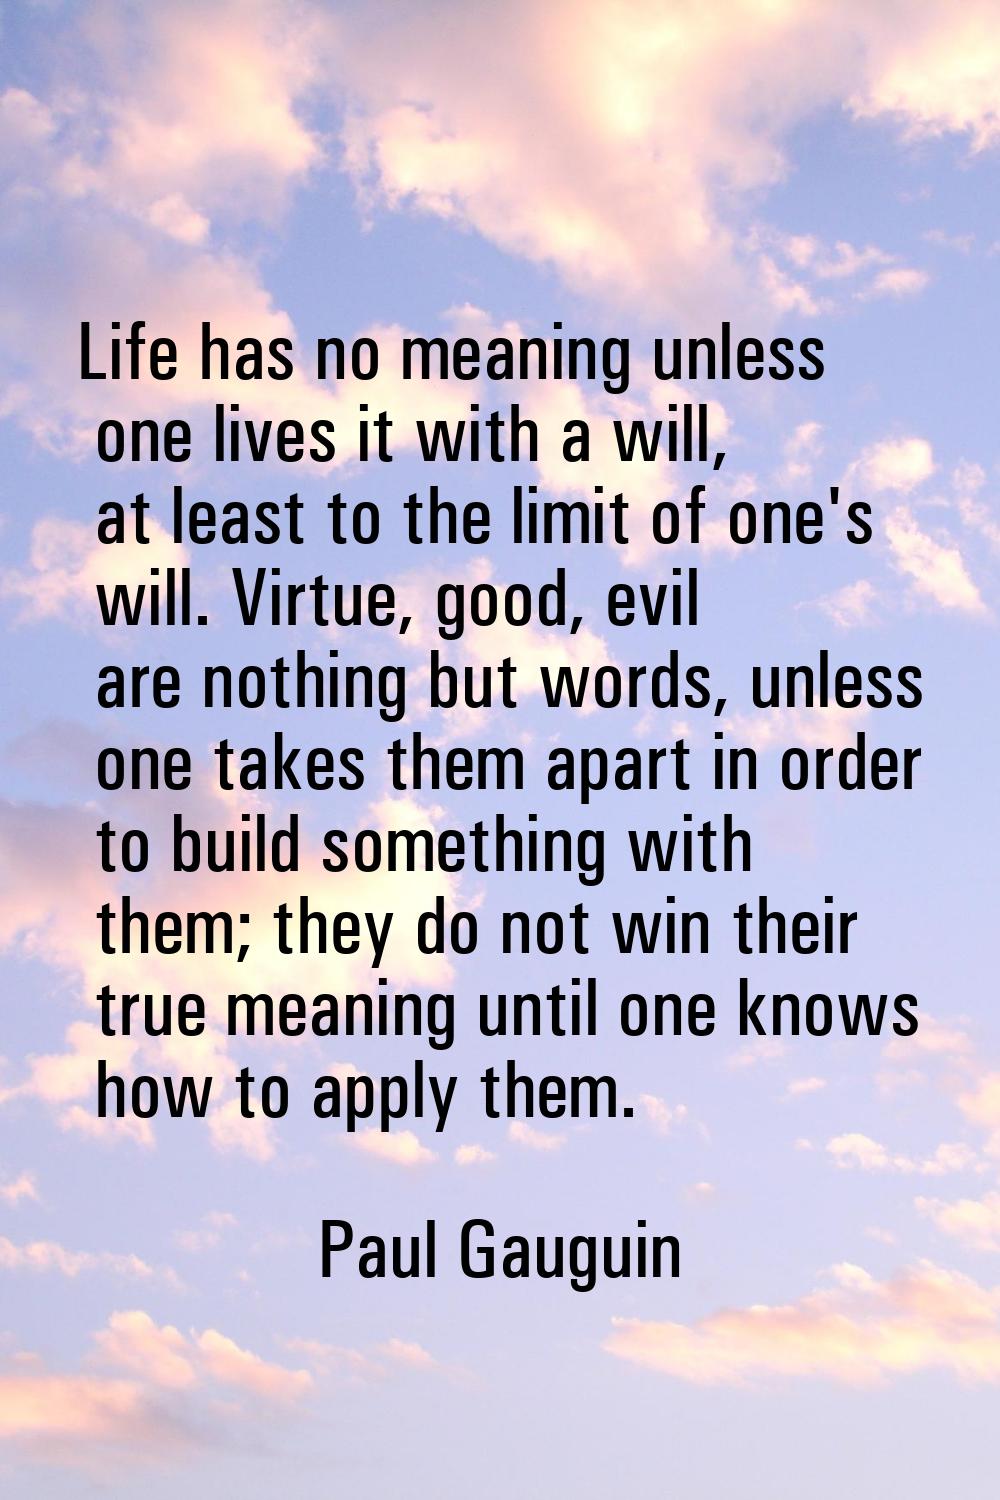 Life has no meaning unless one lives it with a will, at least to the limit of one's will. Virtue, g